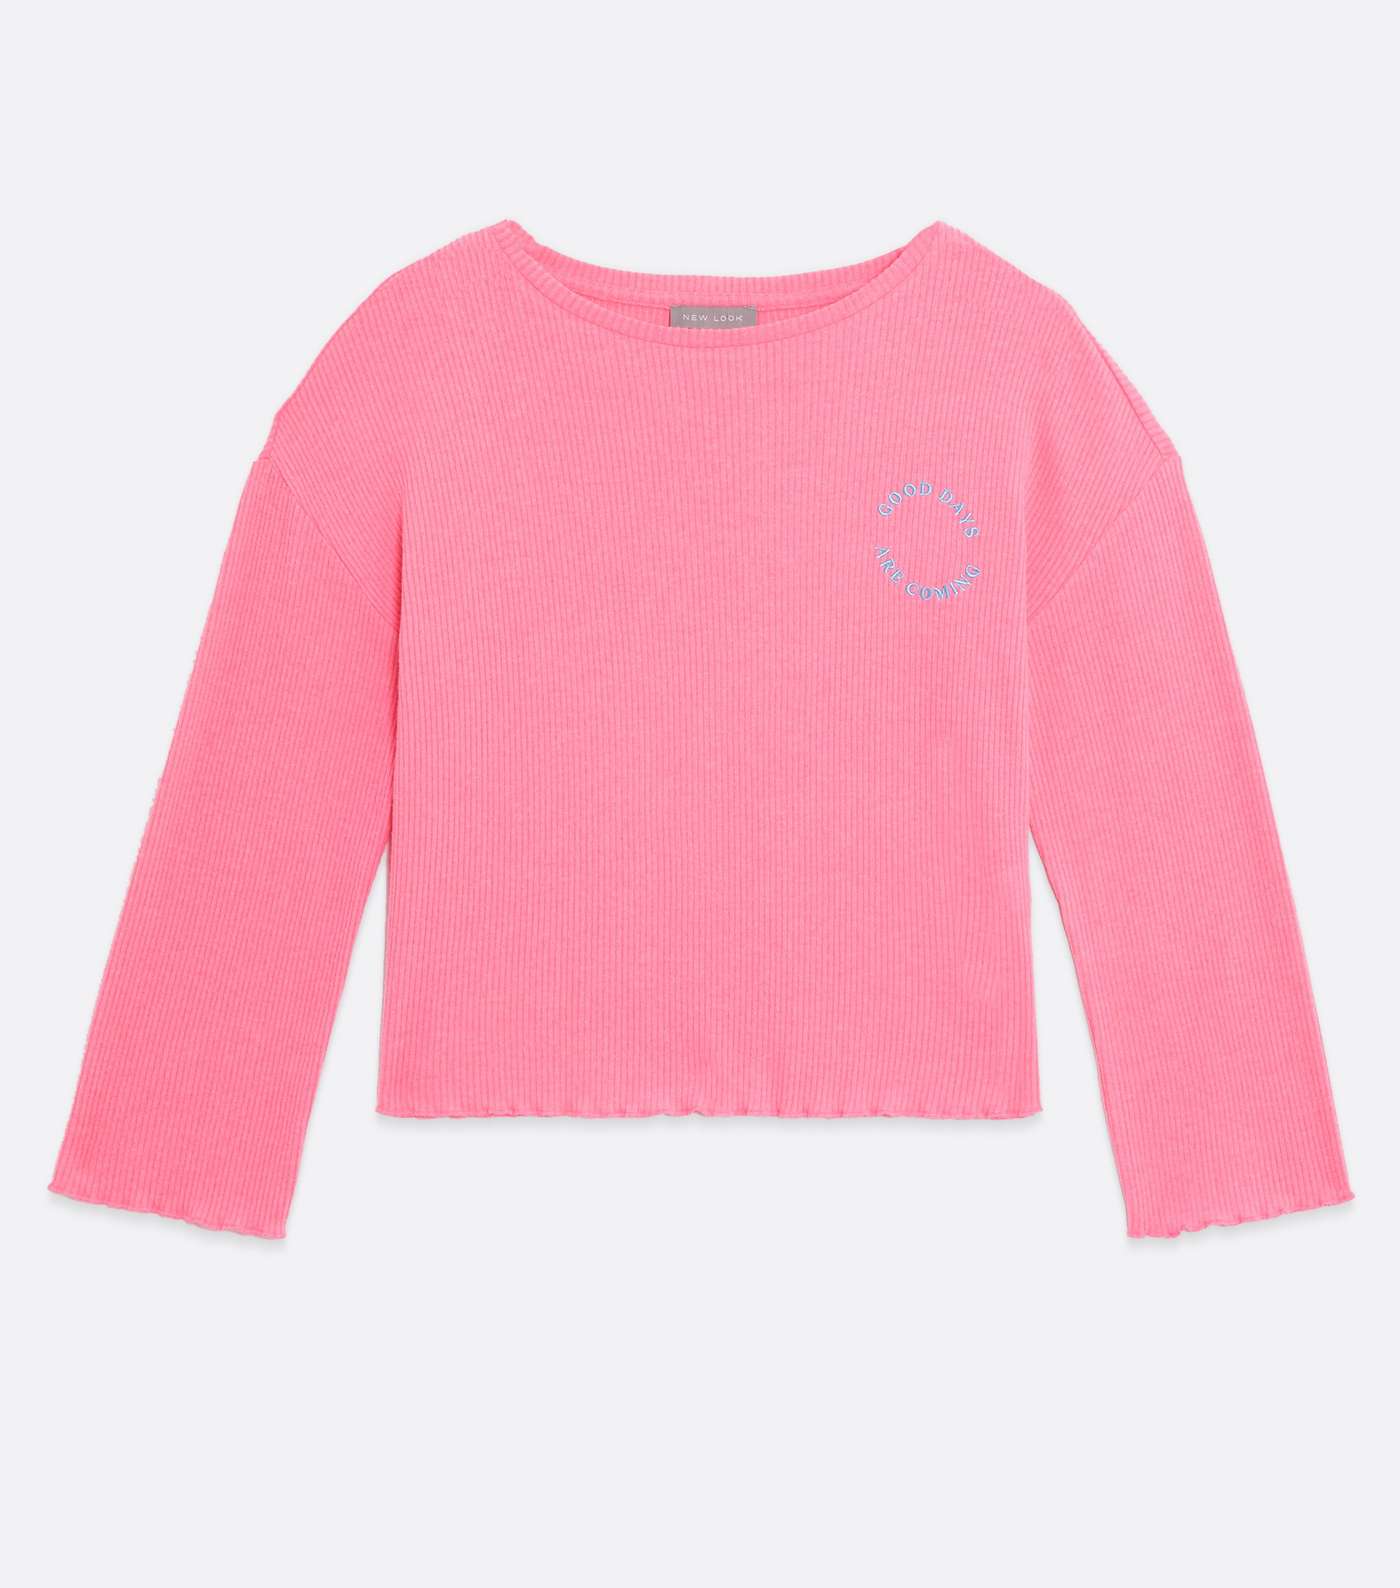 Bright Pink Good Days Embroidered Lounge Top Image 5